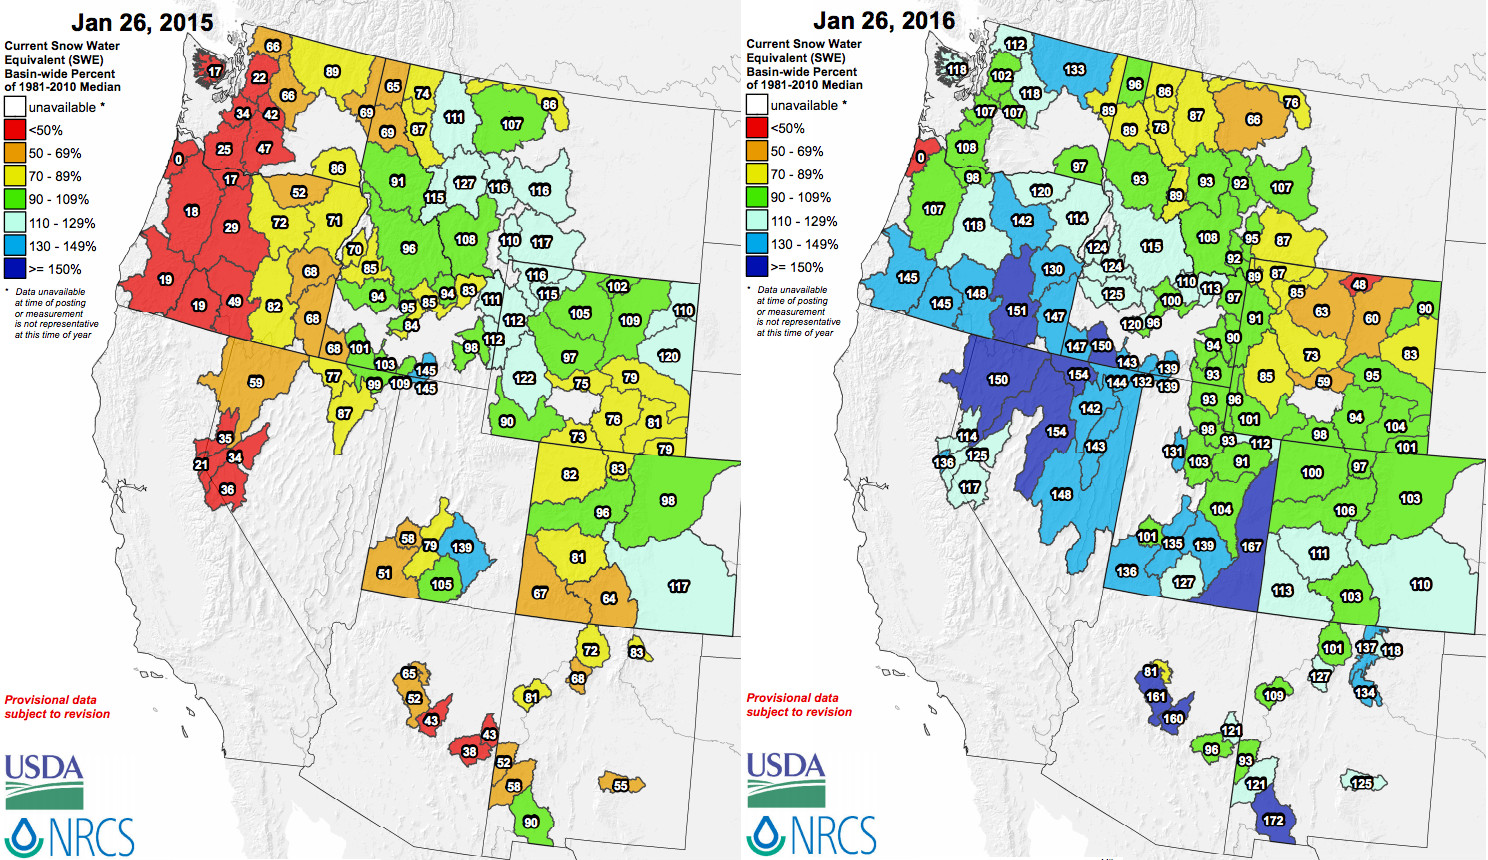 Snowpack numbers compared January 2015, January 2016